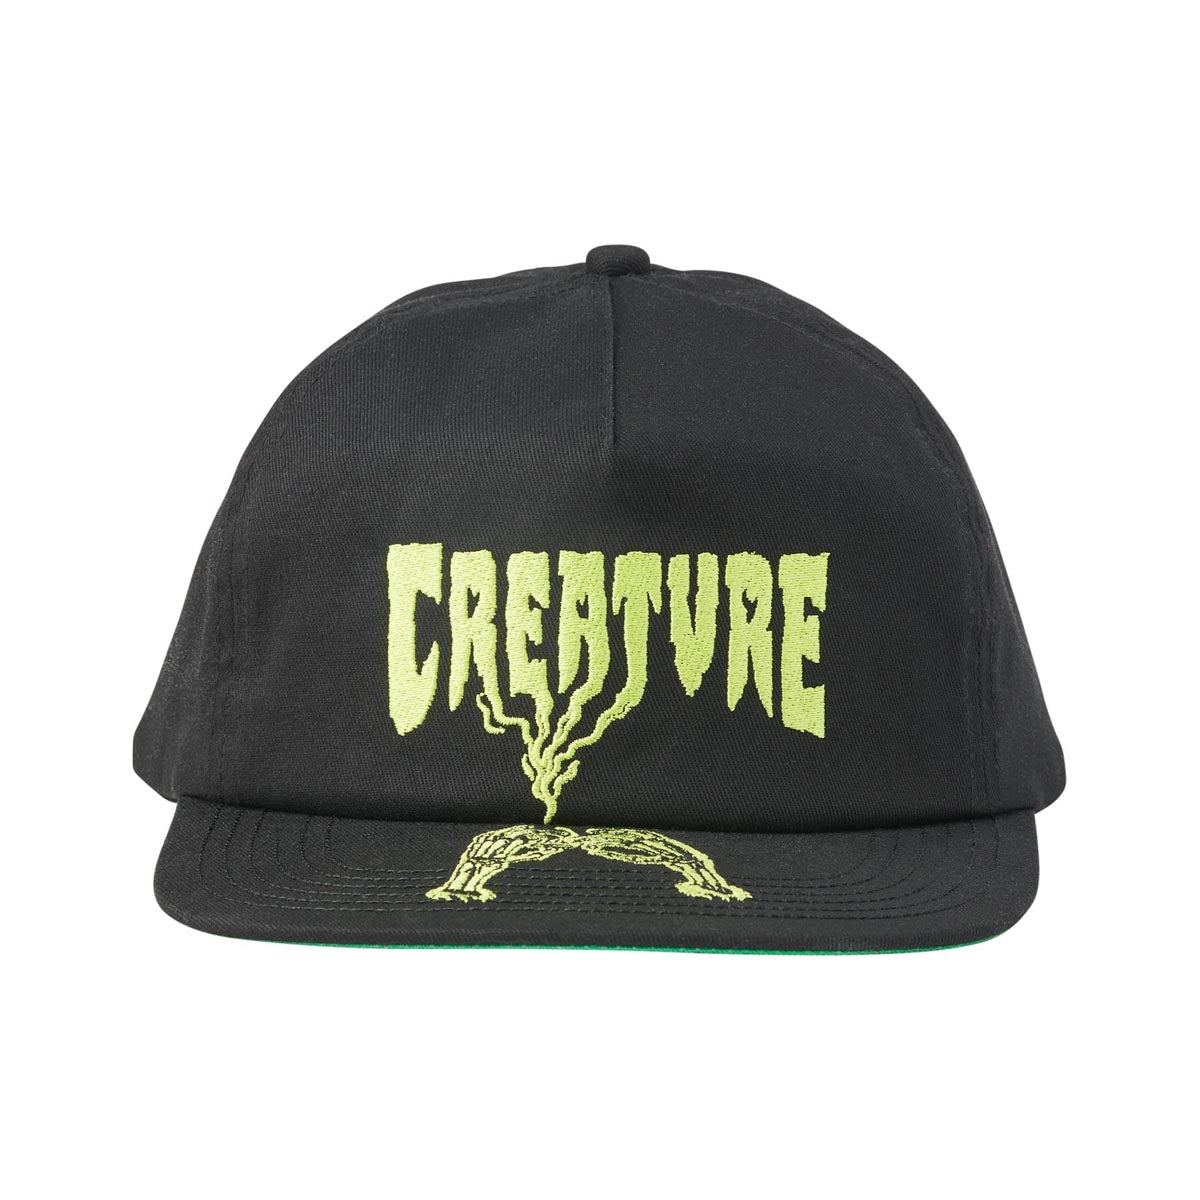 Creature Rolling In The Grave Snapback Hat - Black image 3